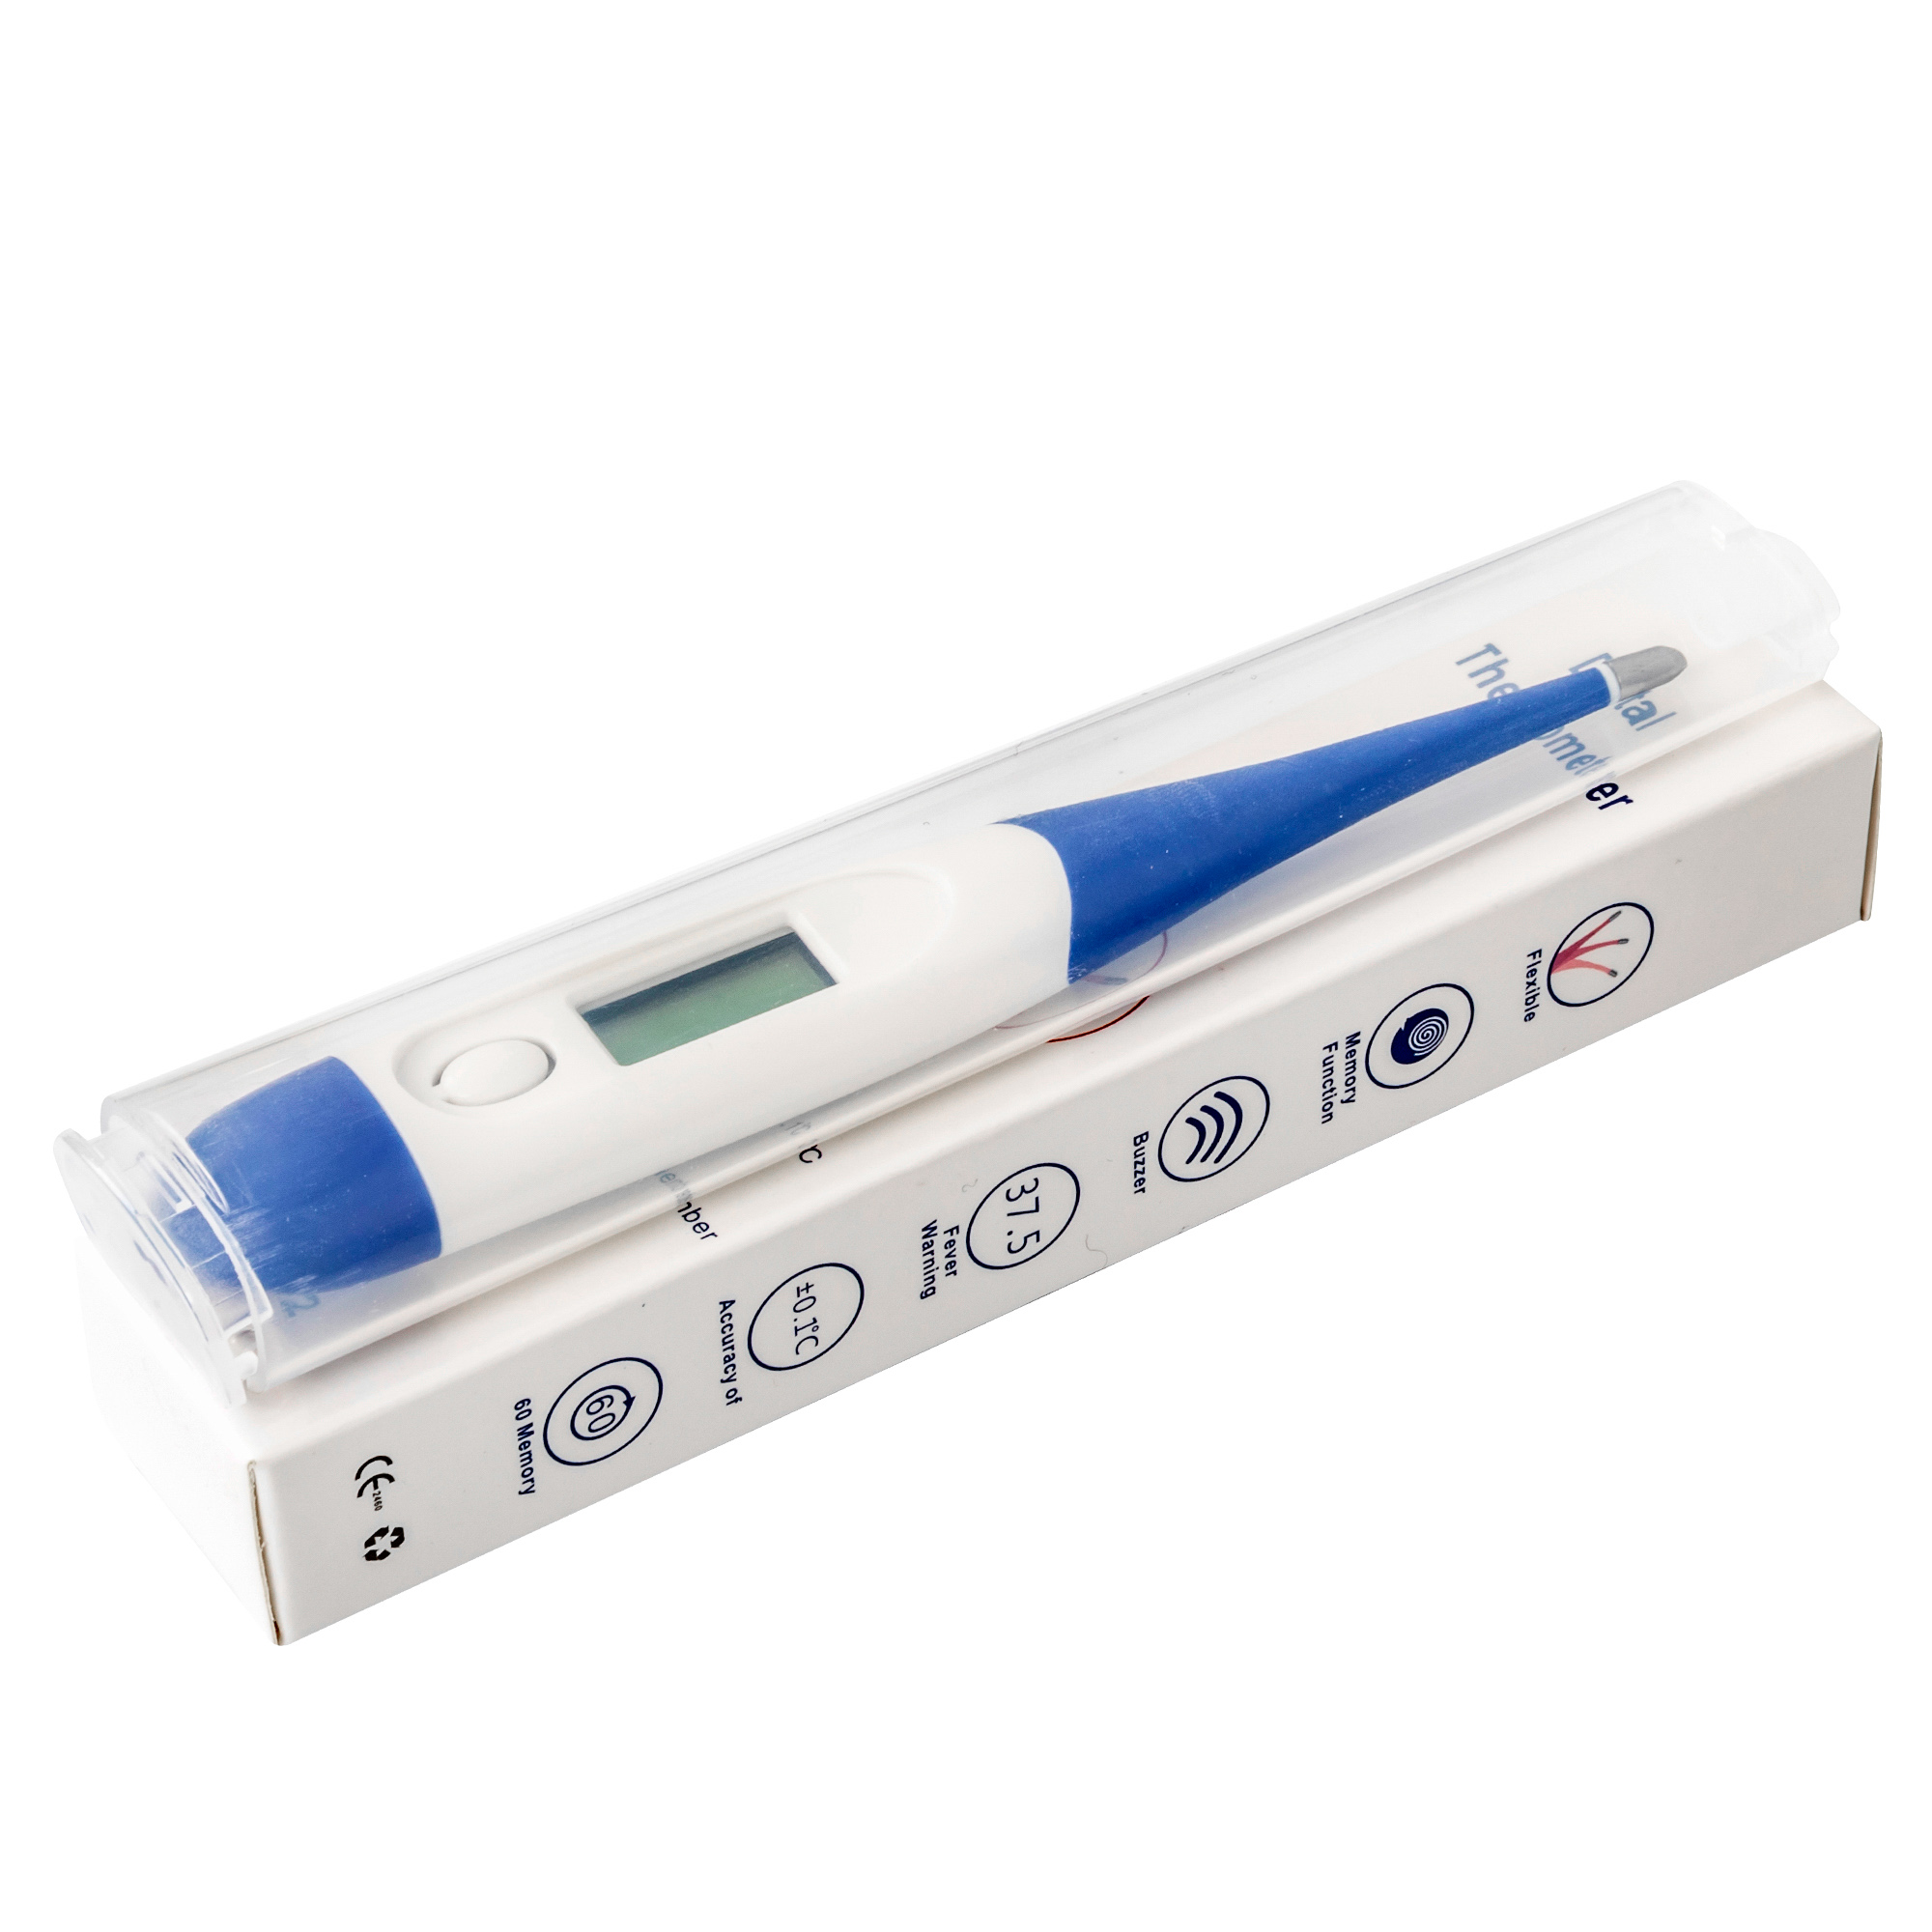 Display Waterproof Accurate High Sensitivity Thermometer